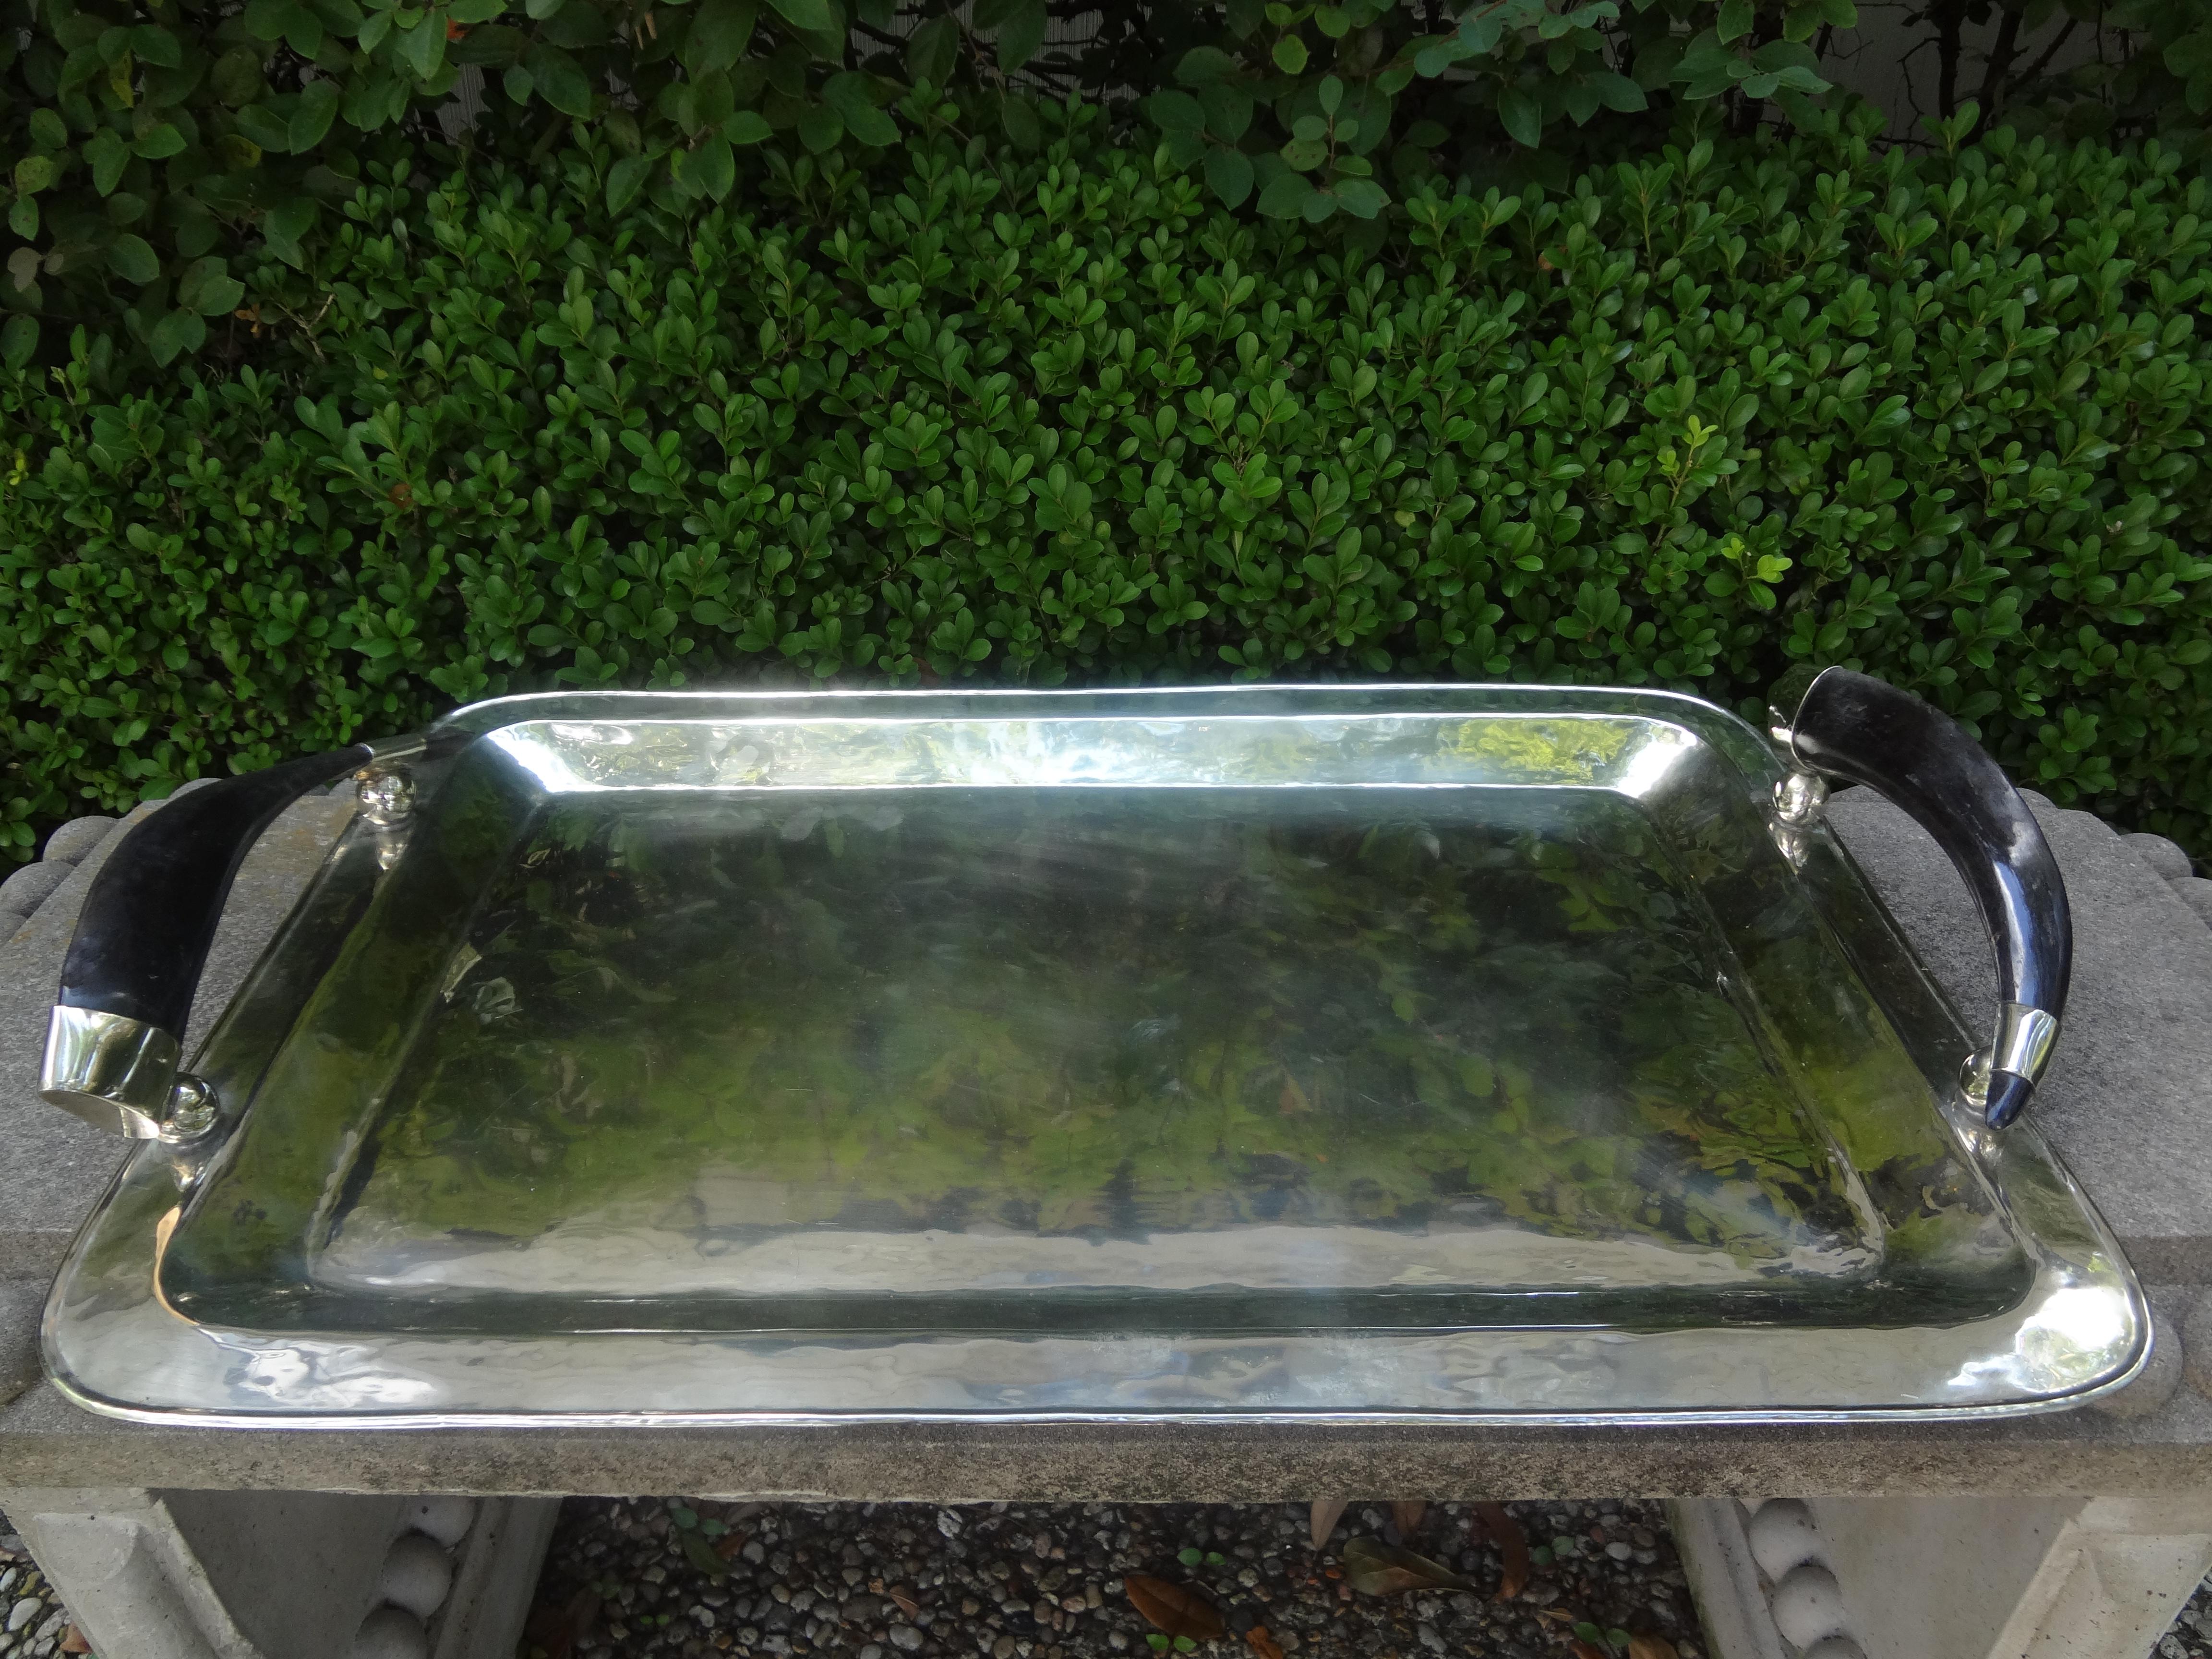 Stunning vintage Italian silver plated rectangular tray with horn handles. This large mid-century Italian Buccellati style tray is perfect for serving or as a cocktail table accessory.